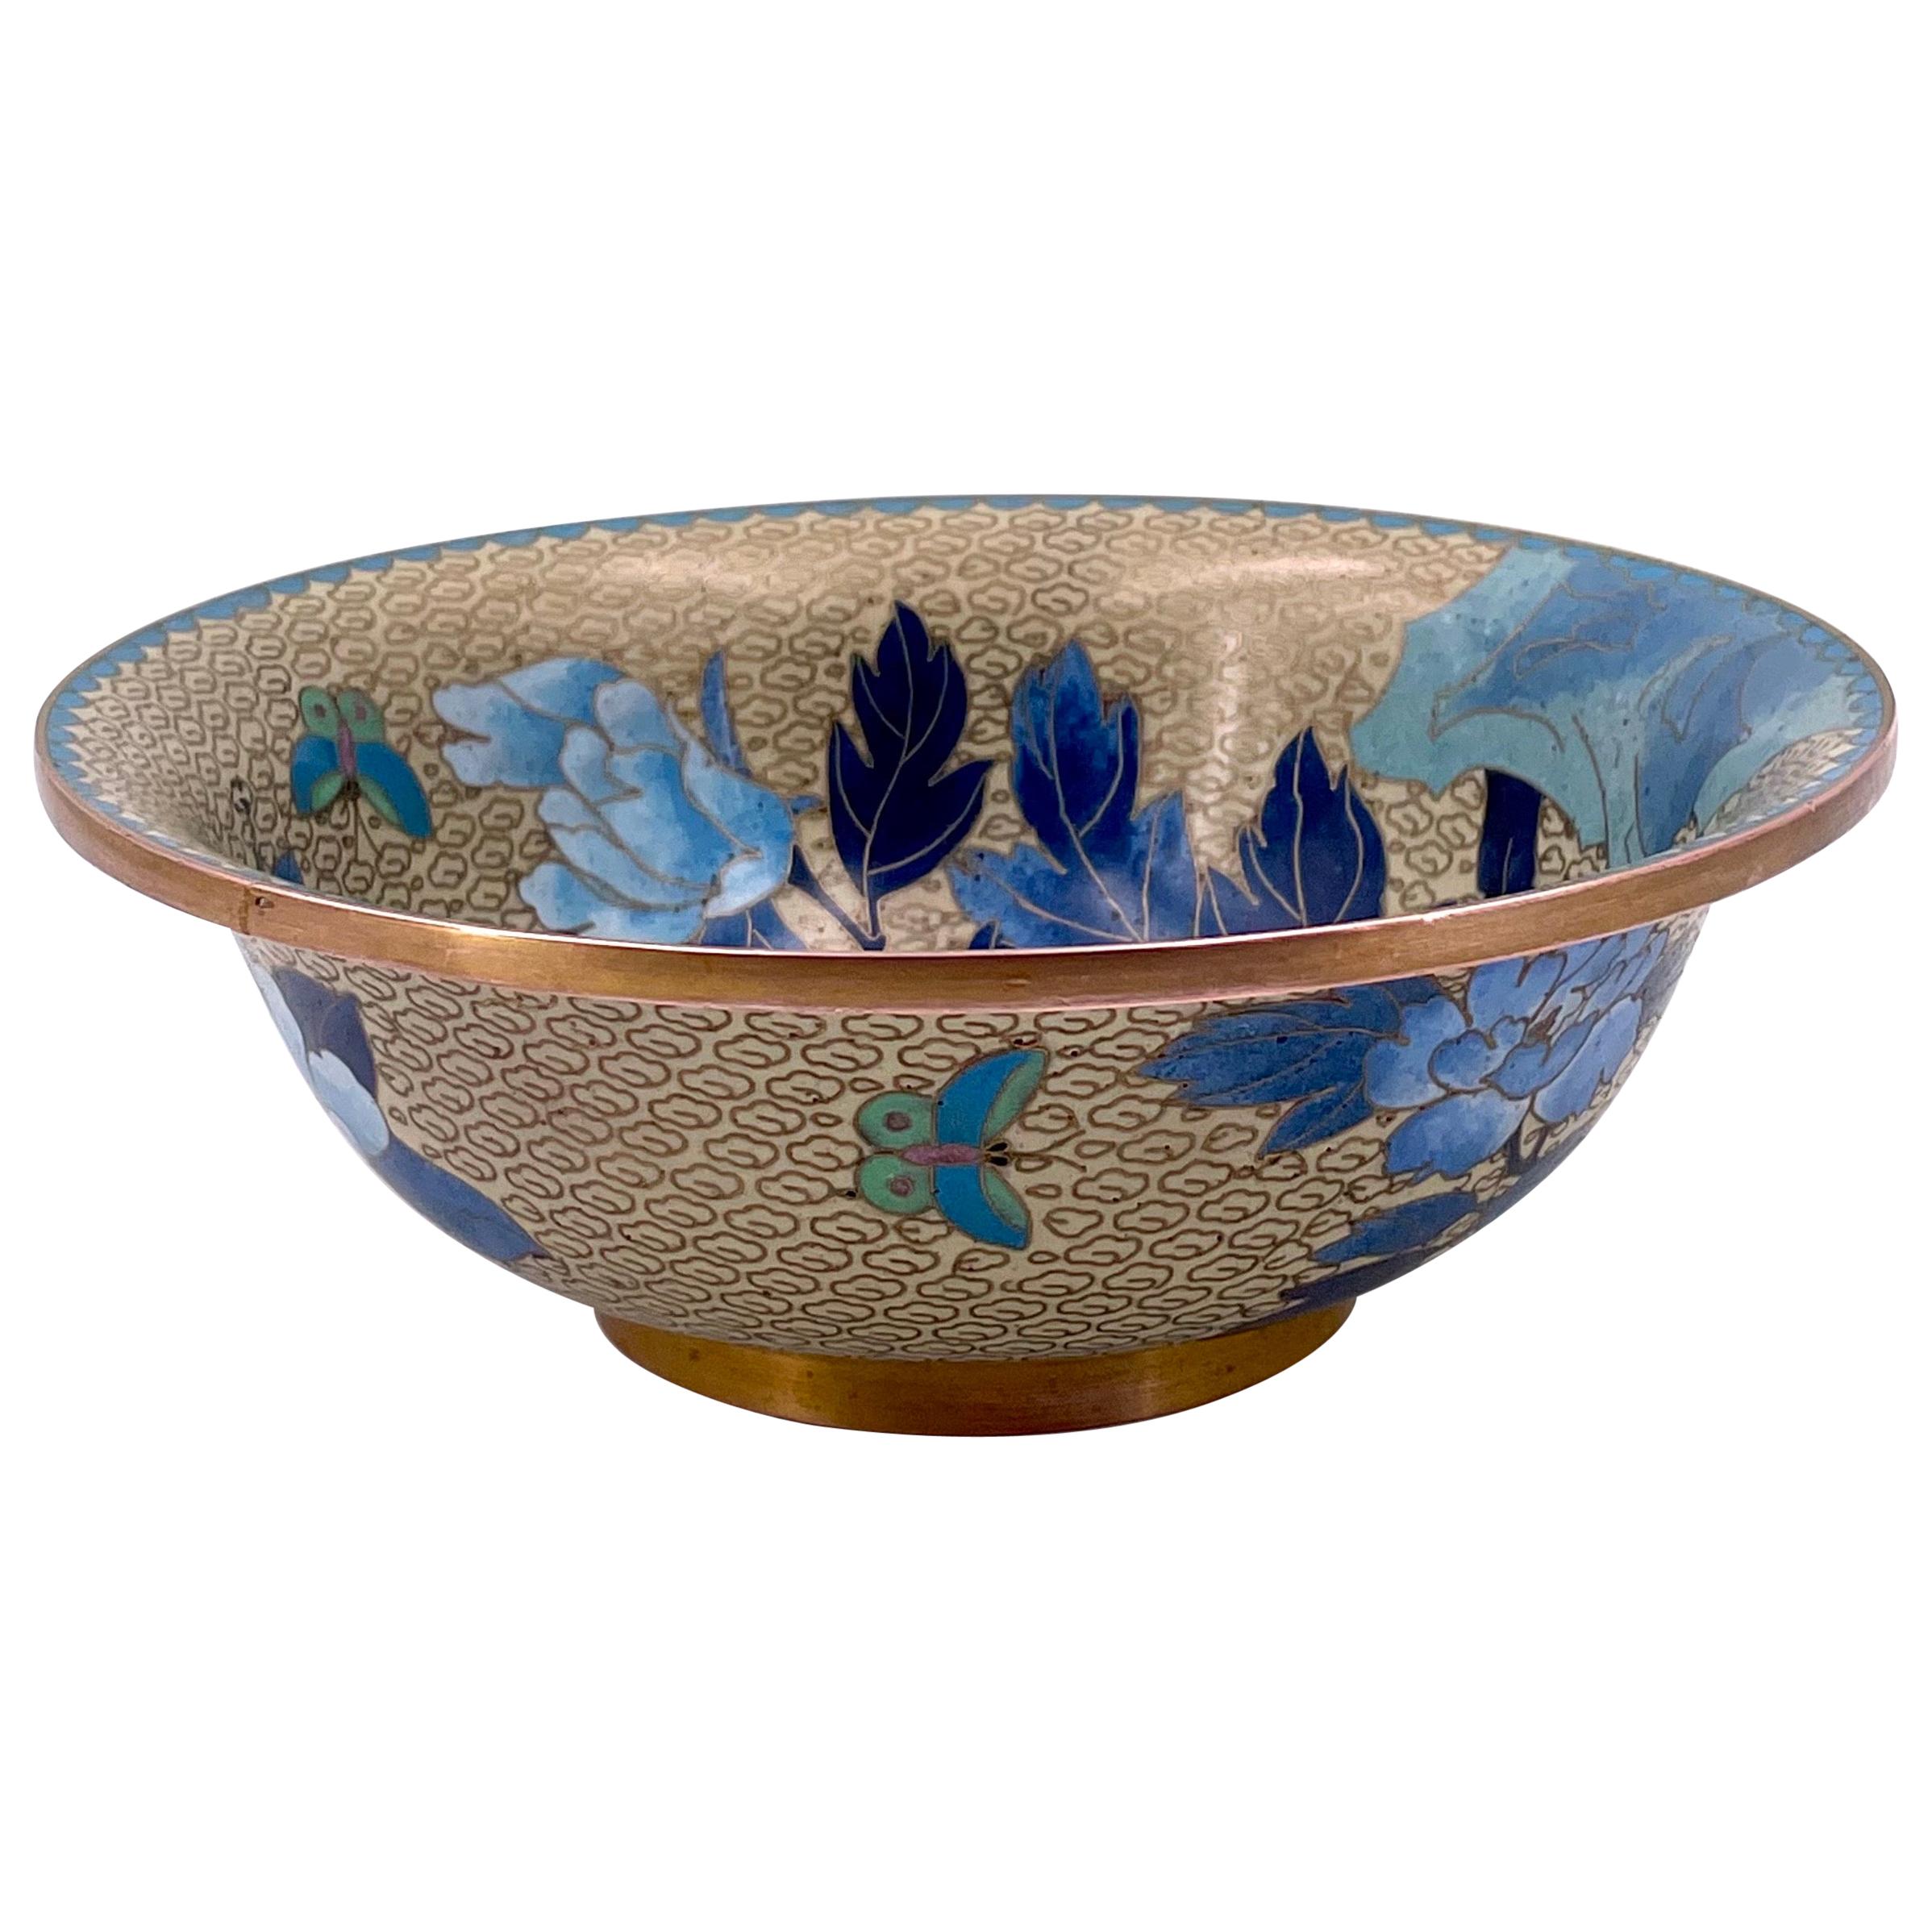 Chinese Cloisonné Footed Bowl with Floral Butterfly Pattern